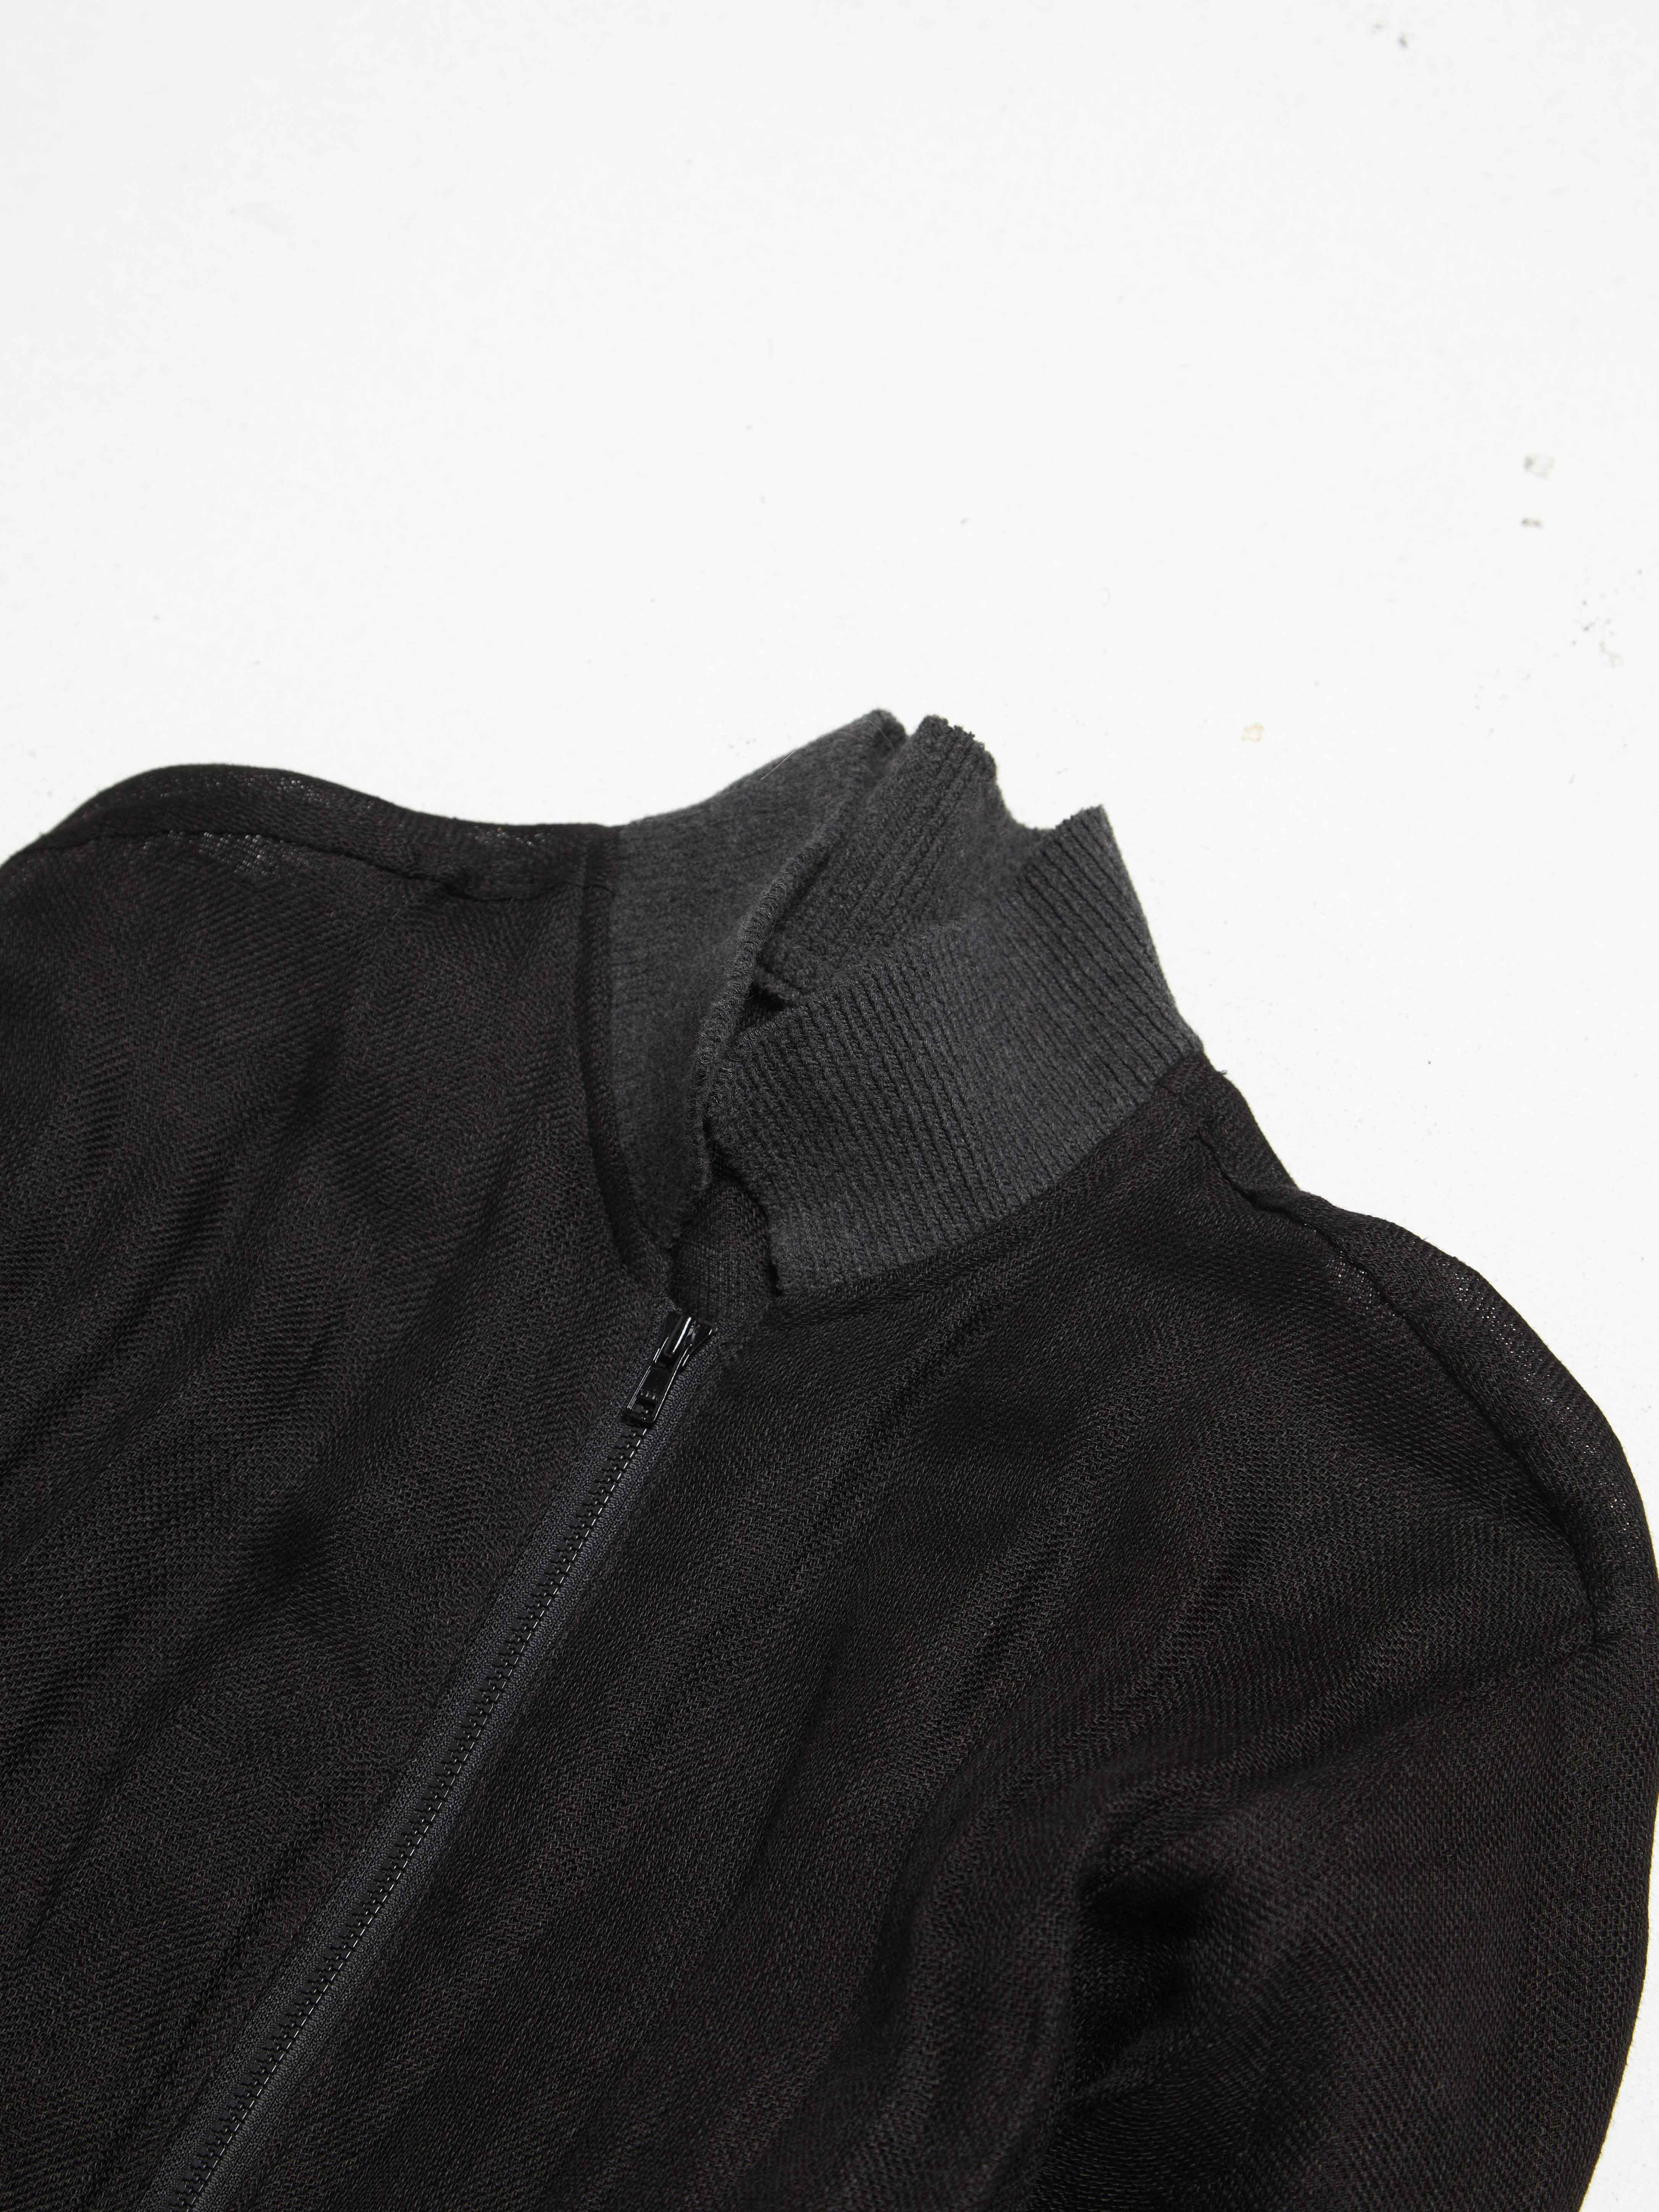 Yohji Yamamoto  Black And Gray Elongated Linen Cotton Zipped Robe  In New Condition For Sale In Dover, DE